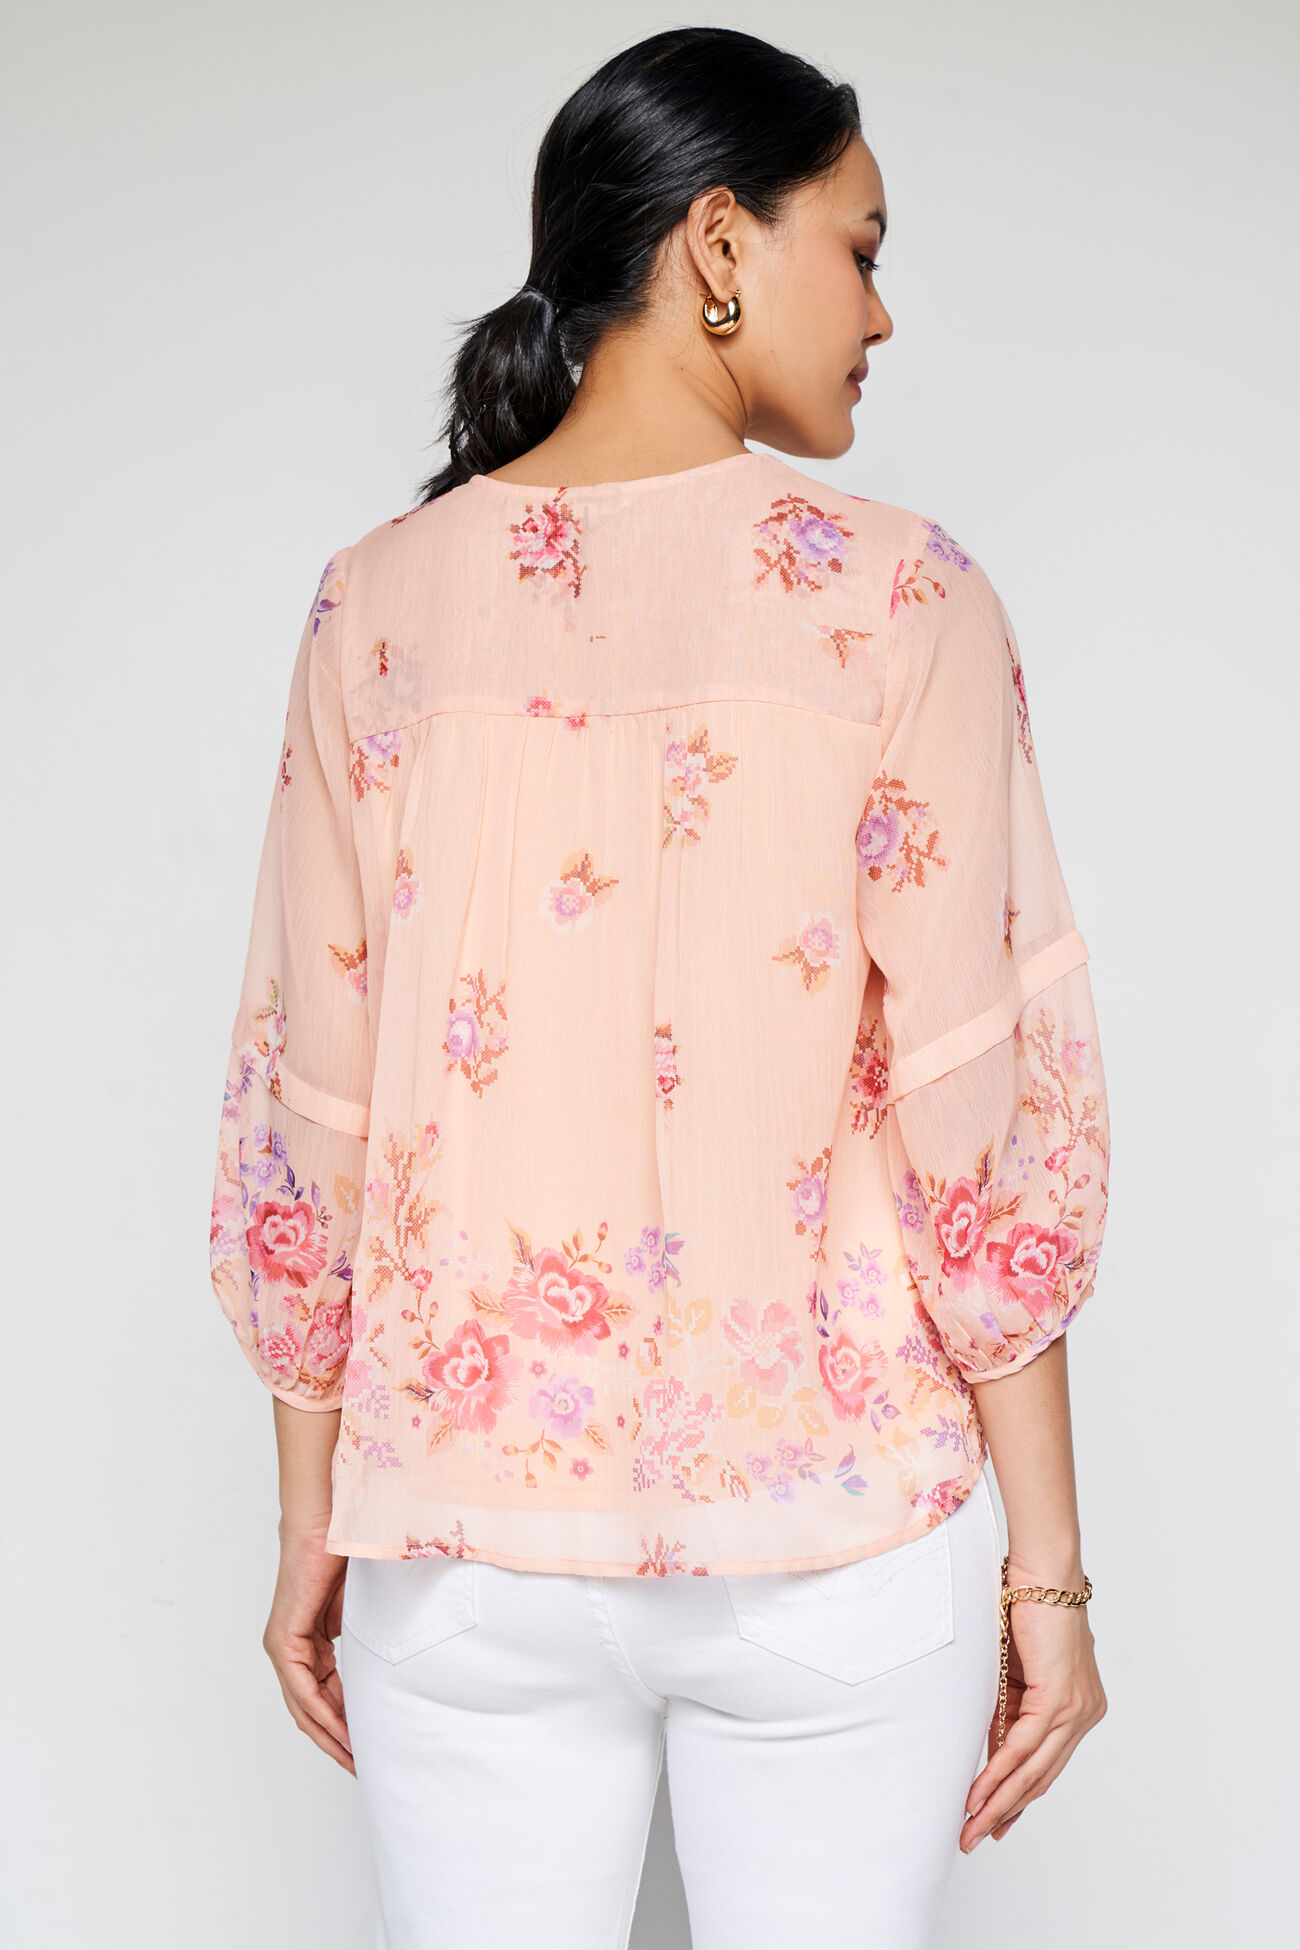 Sunup Floral Top, Peach, image 4